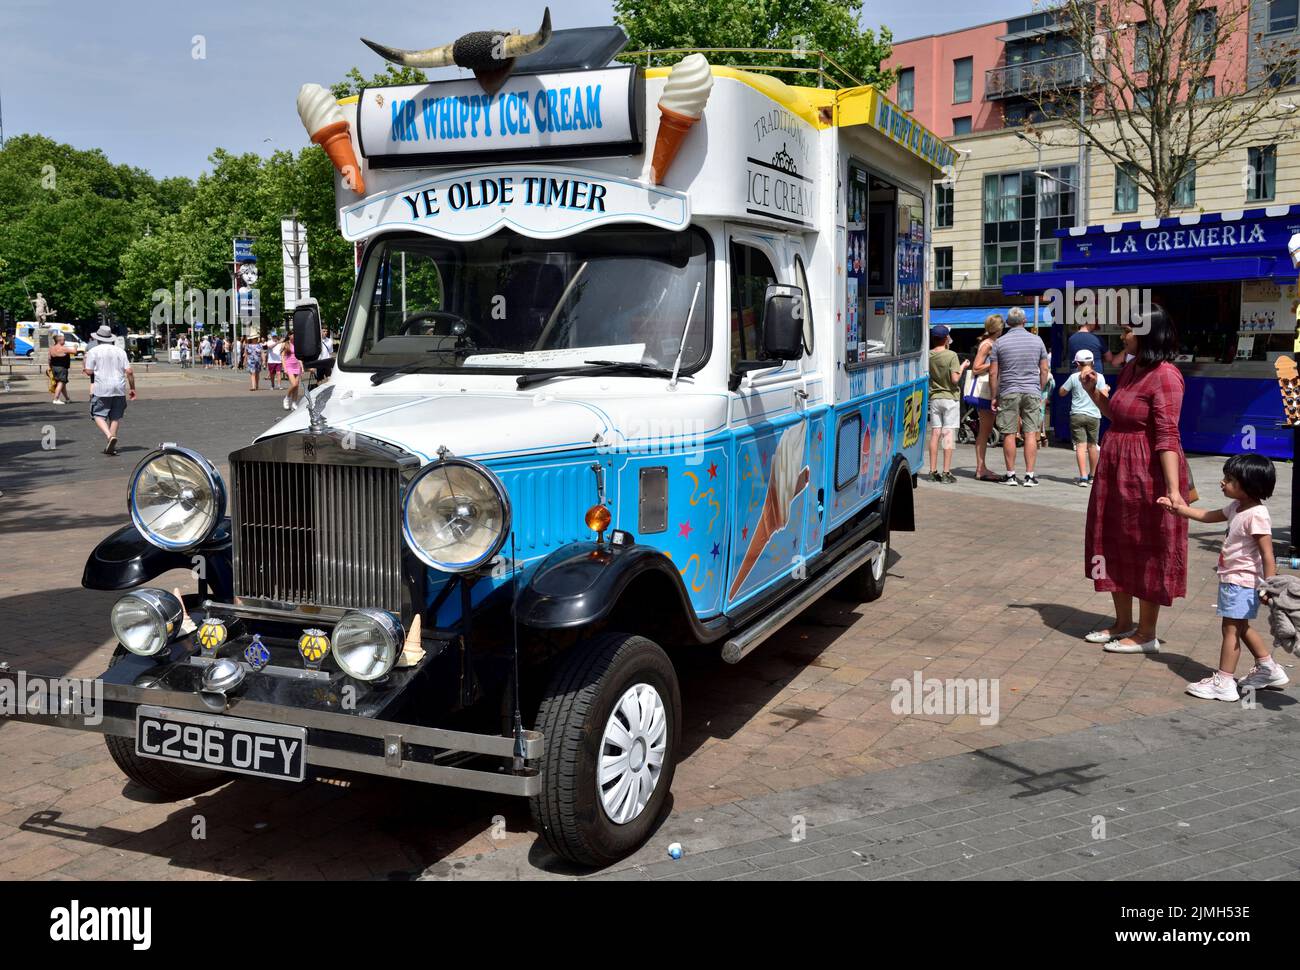 Traditional mobile Rolls-Royce Mr Whippy Ice Cream van in Bristol city centre during hot summer day festival Stock Photo